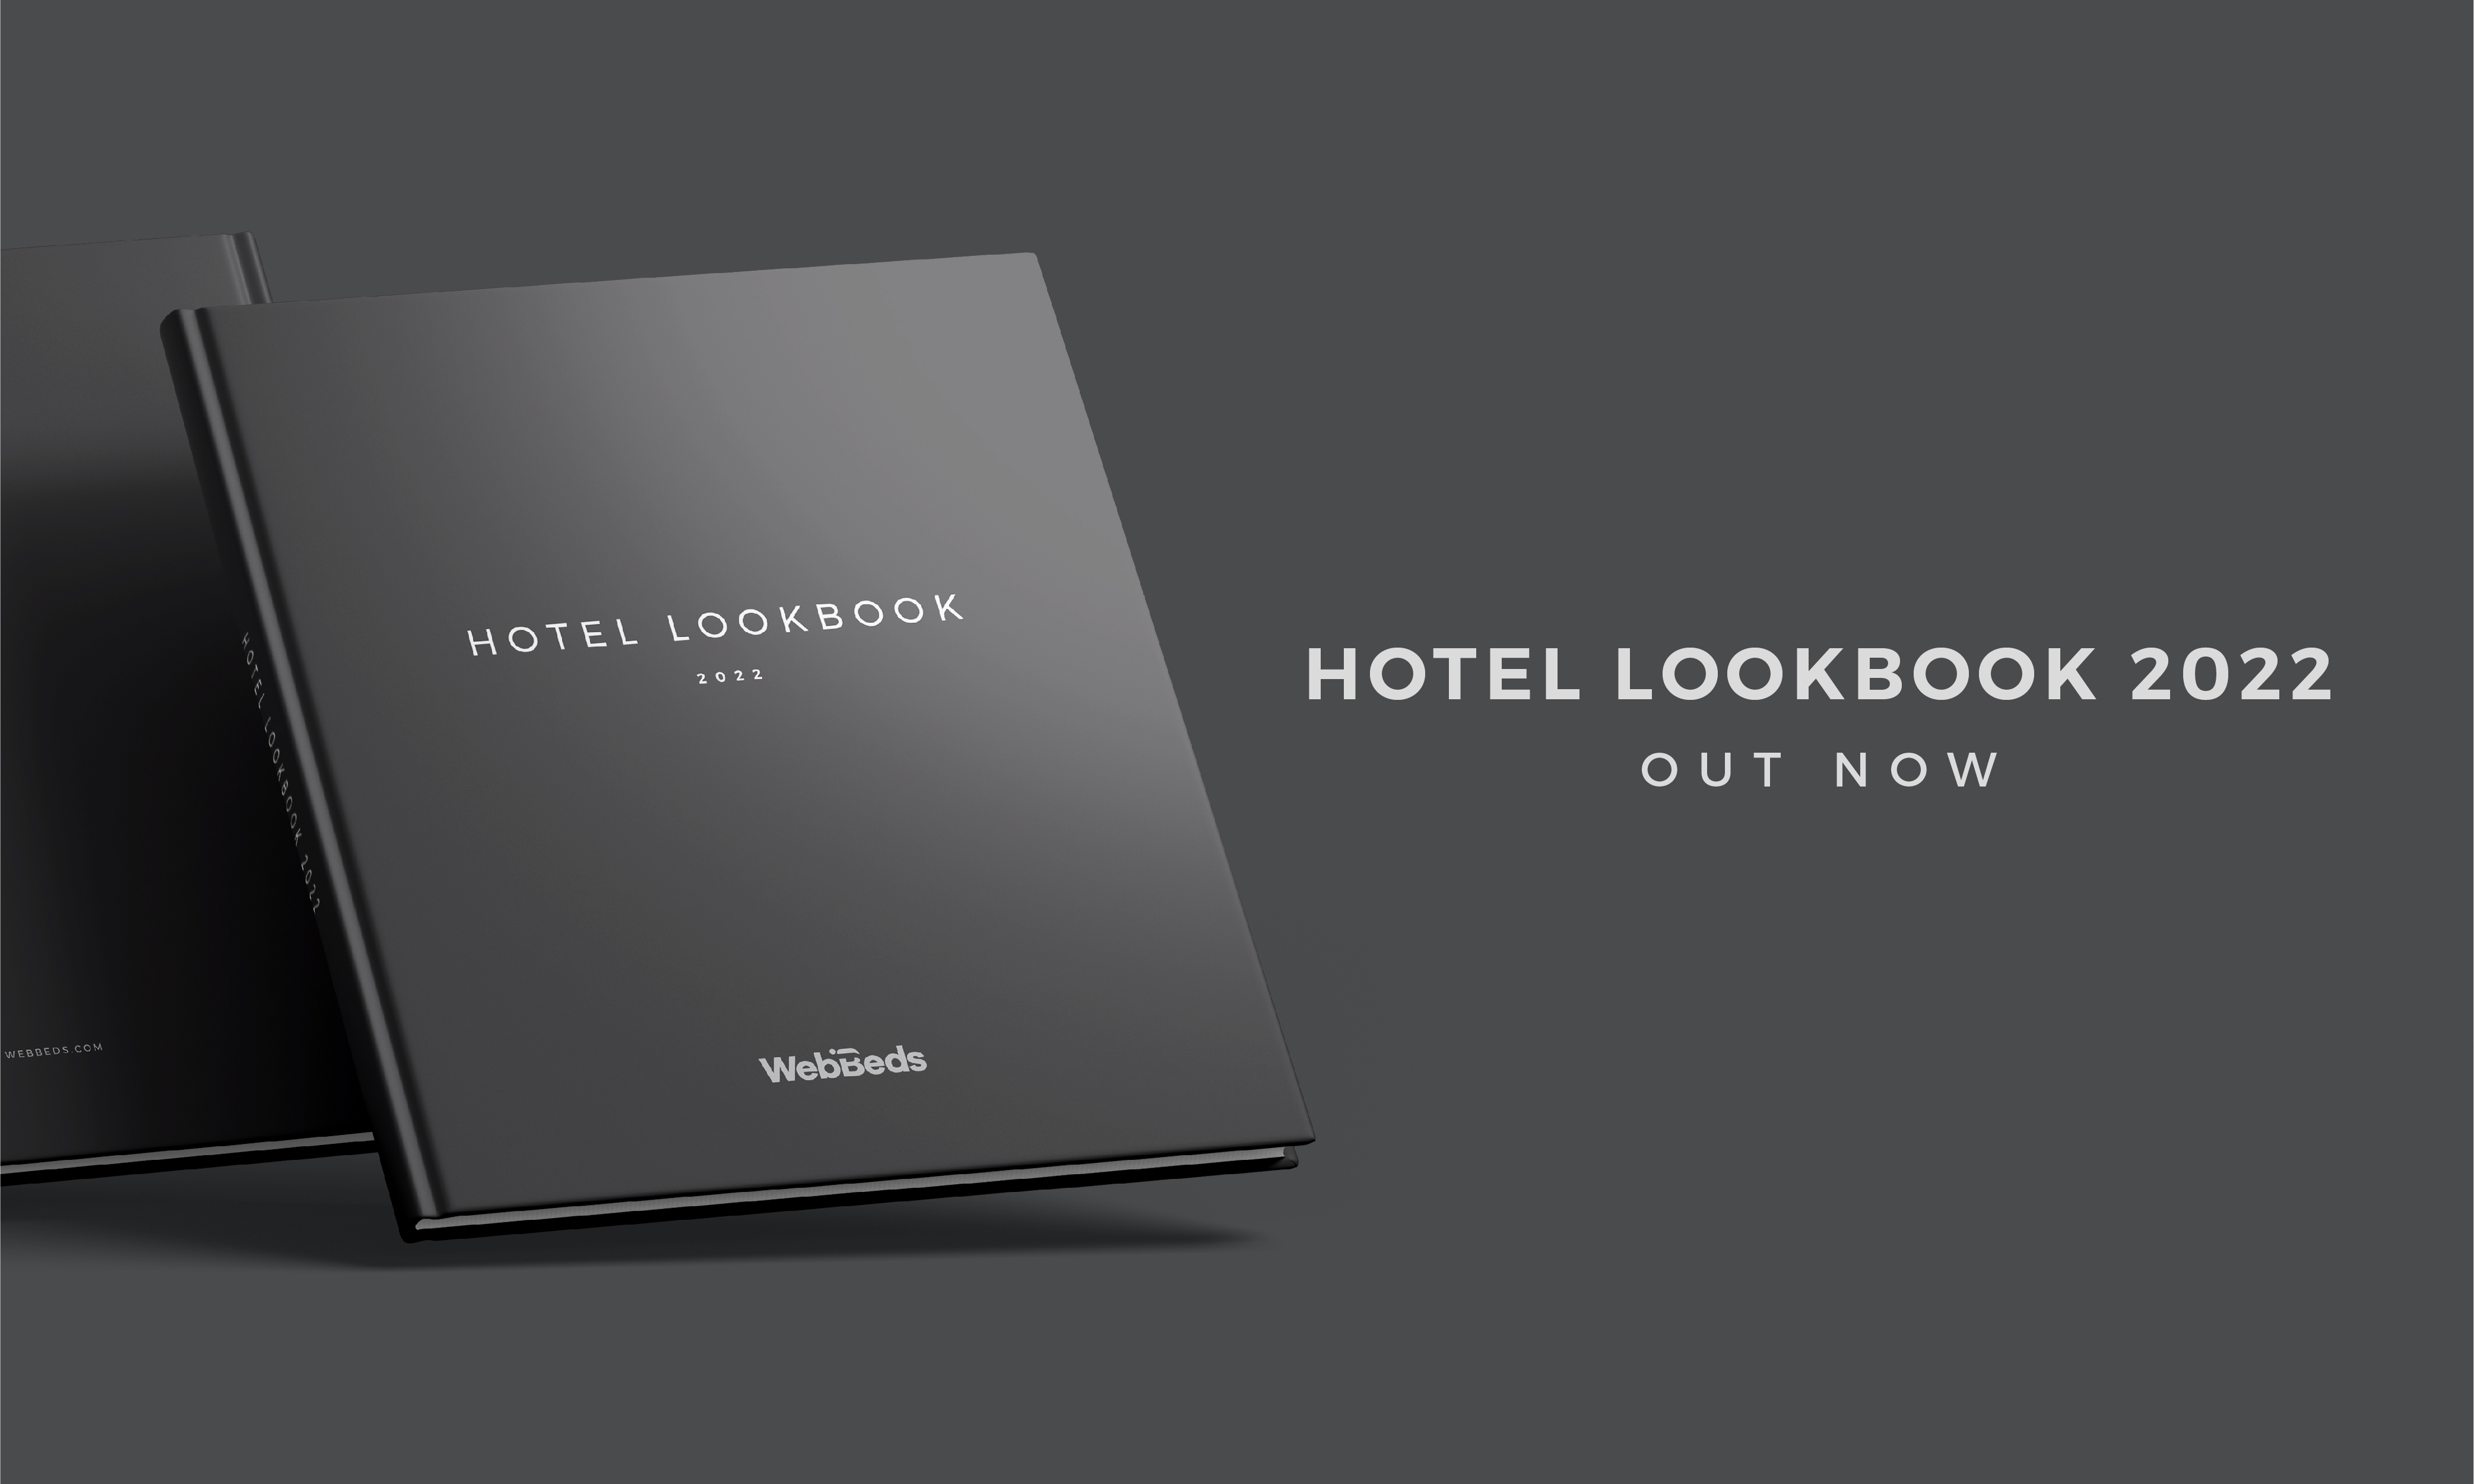 Hotel Lookbook 2022 Out Now